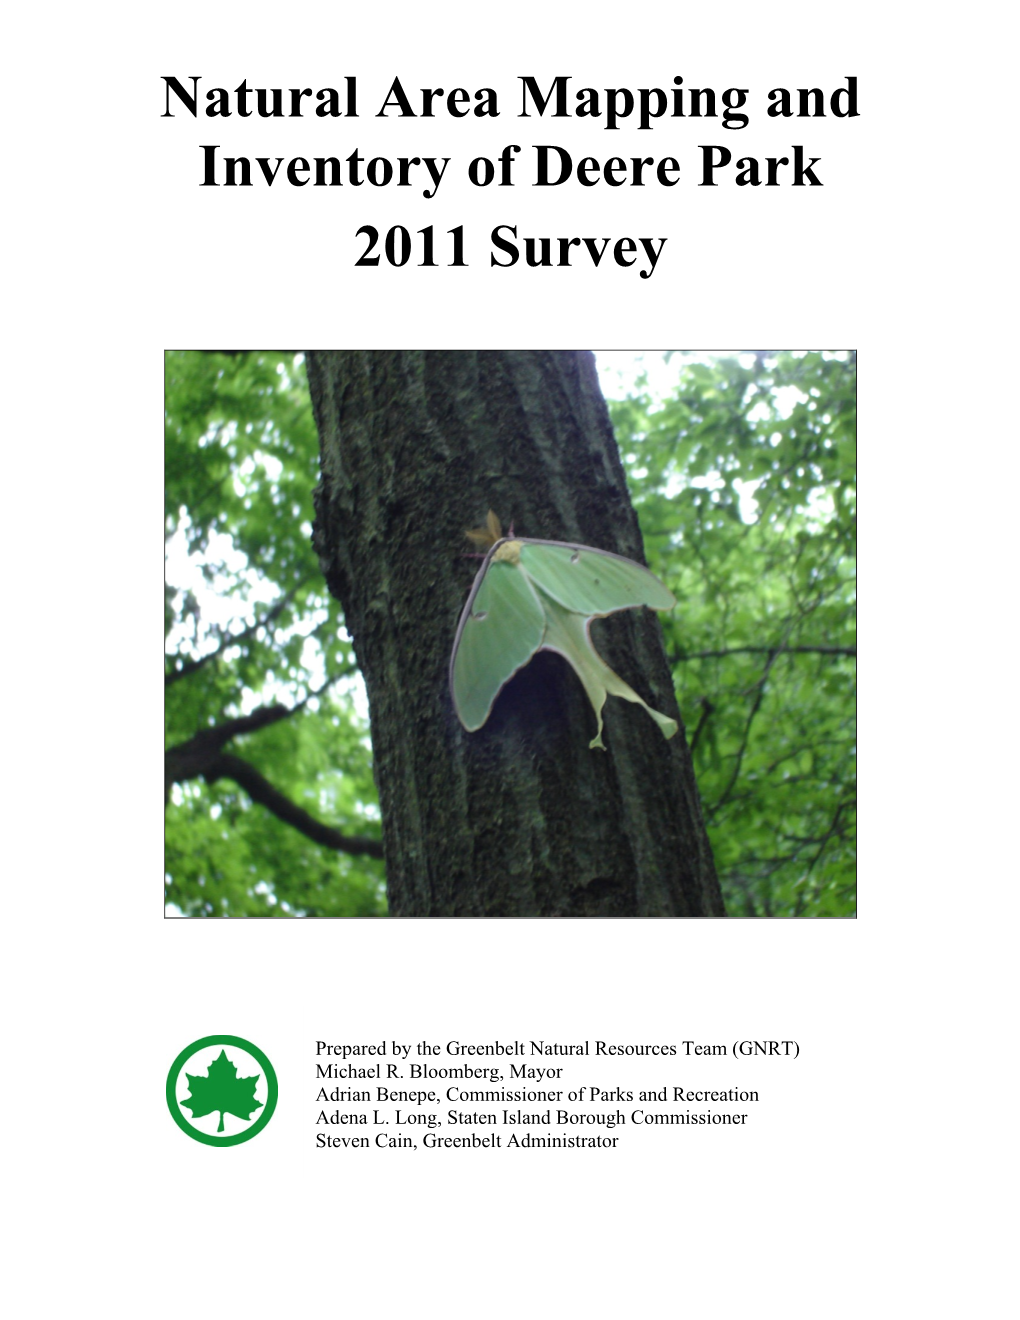 Natural Area Mapping and Inventory of Deere Park 2011 Survey